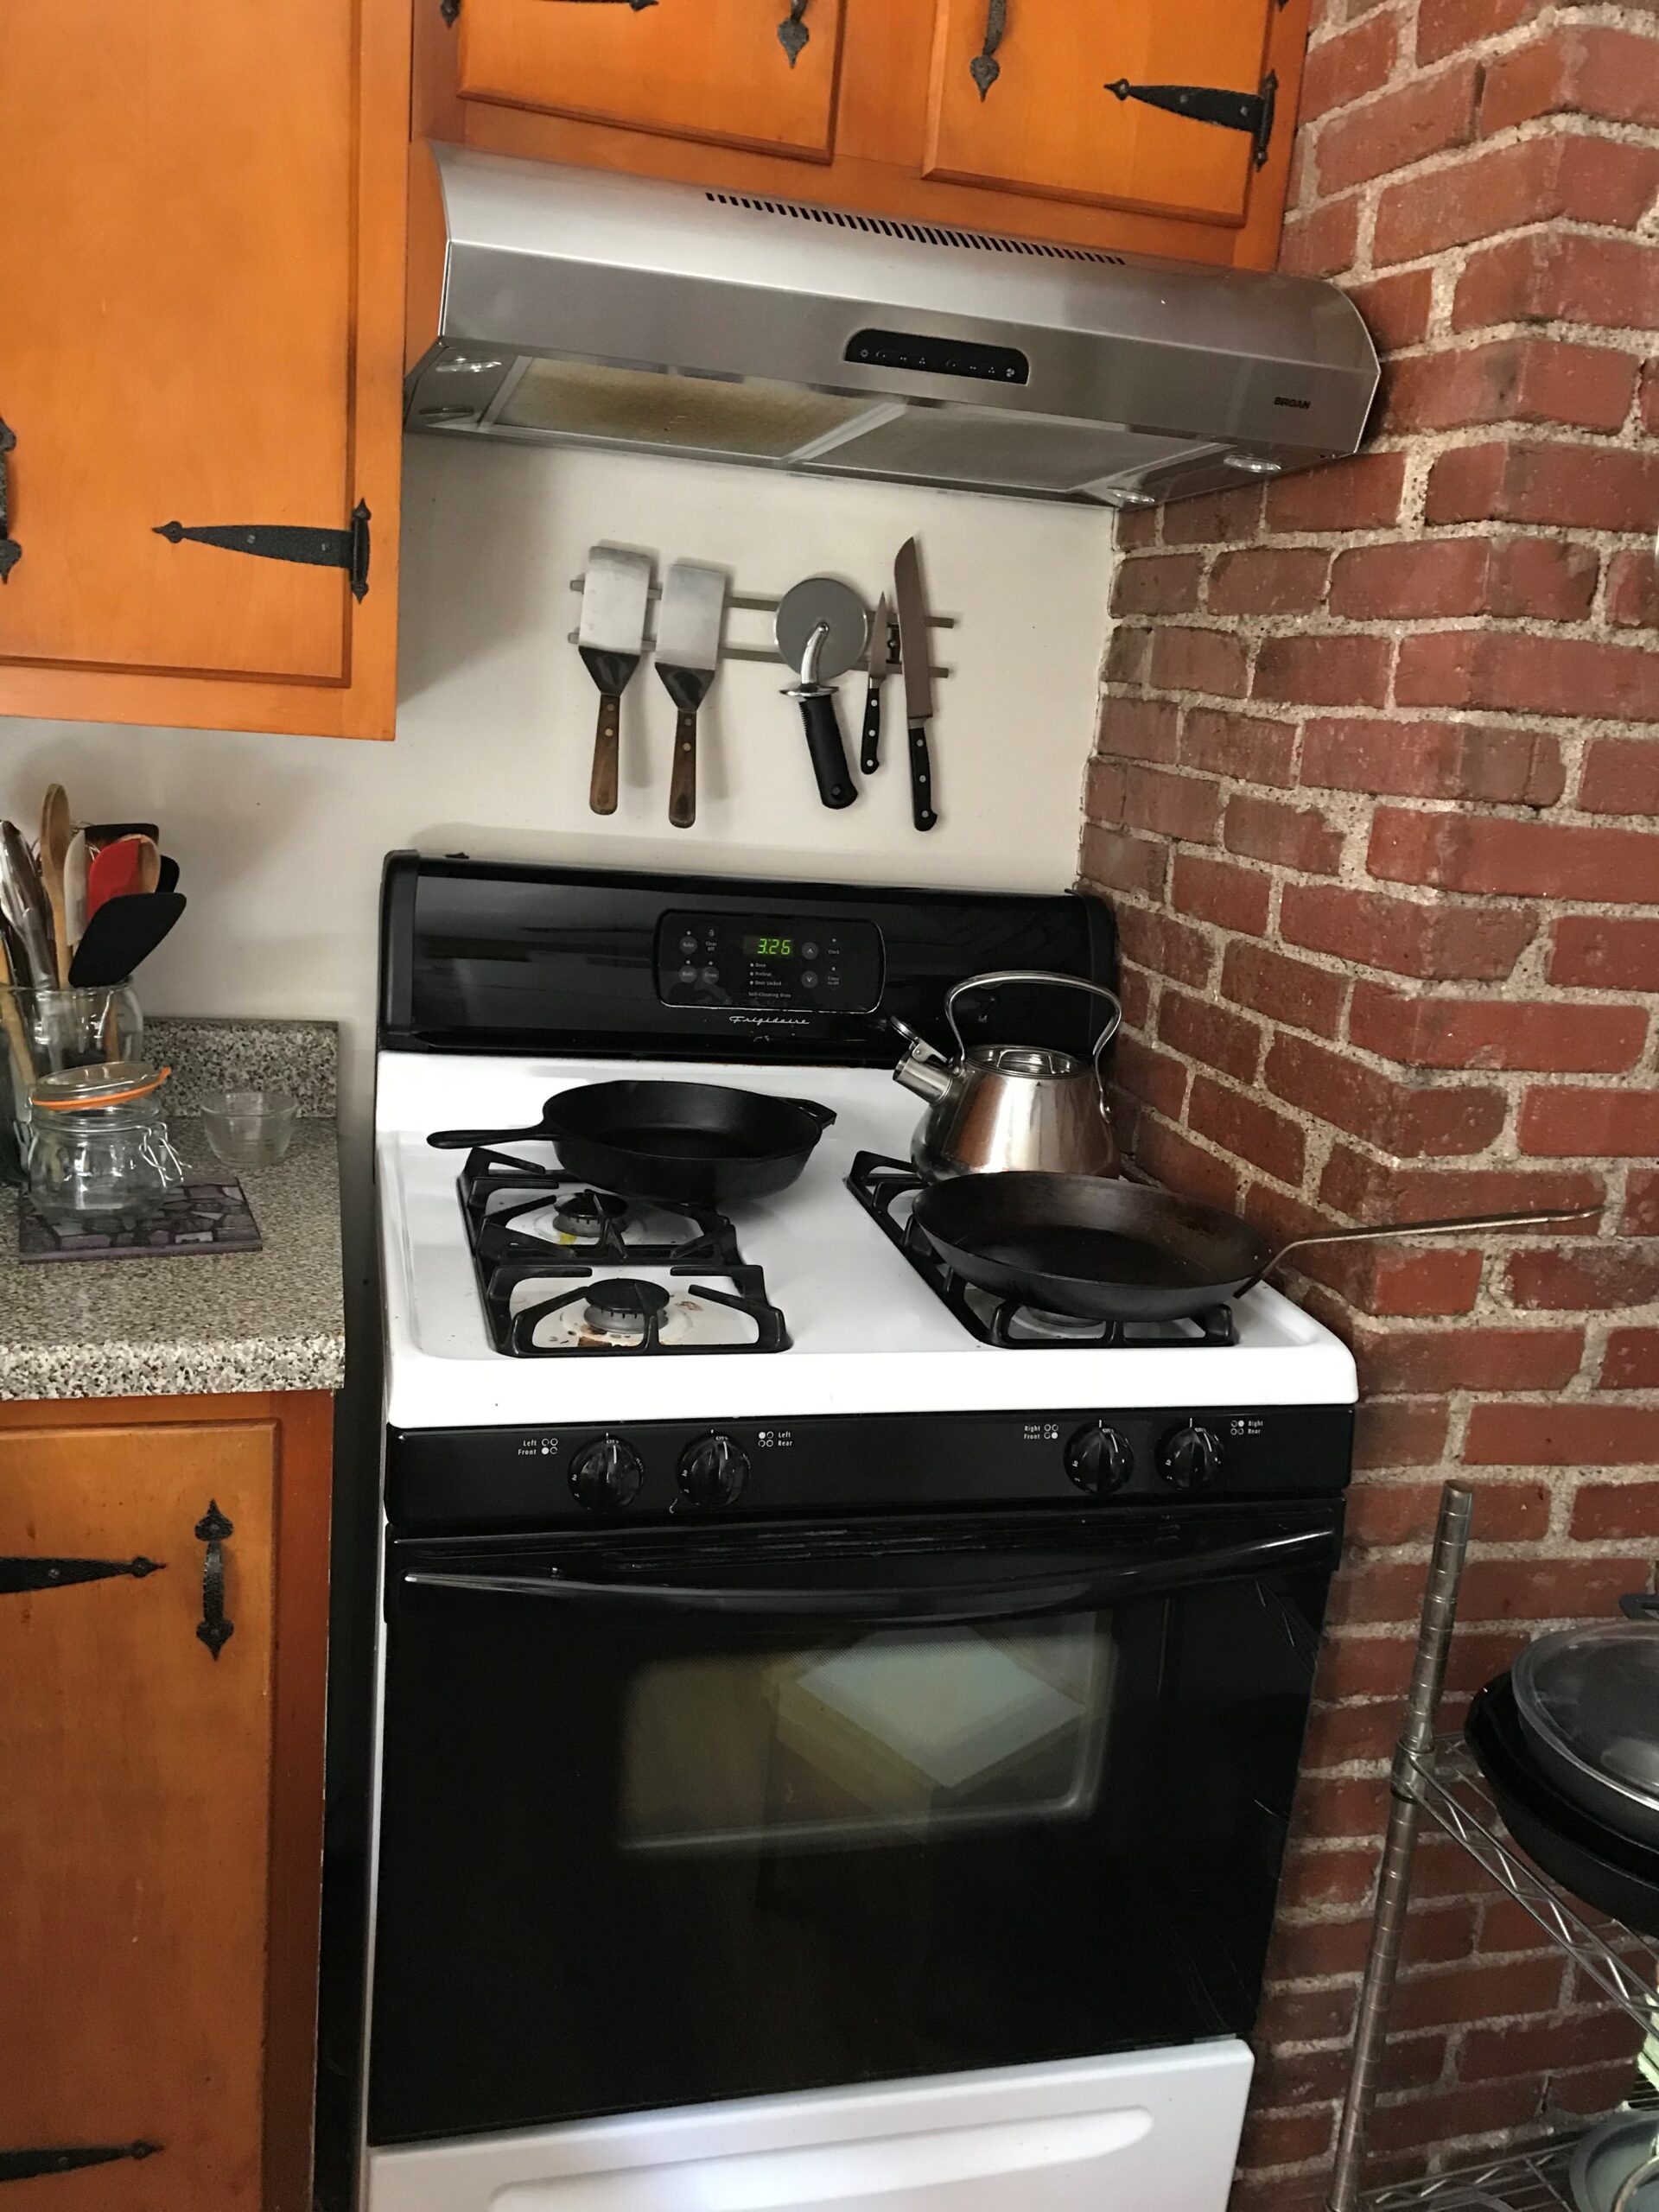 A kitchen range hood and stovetop with pans